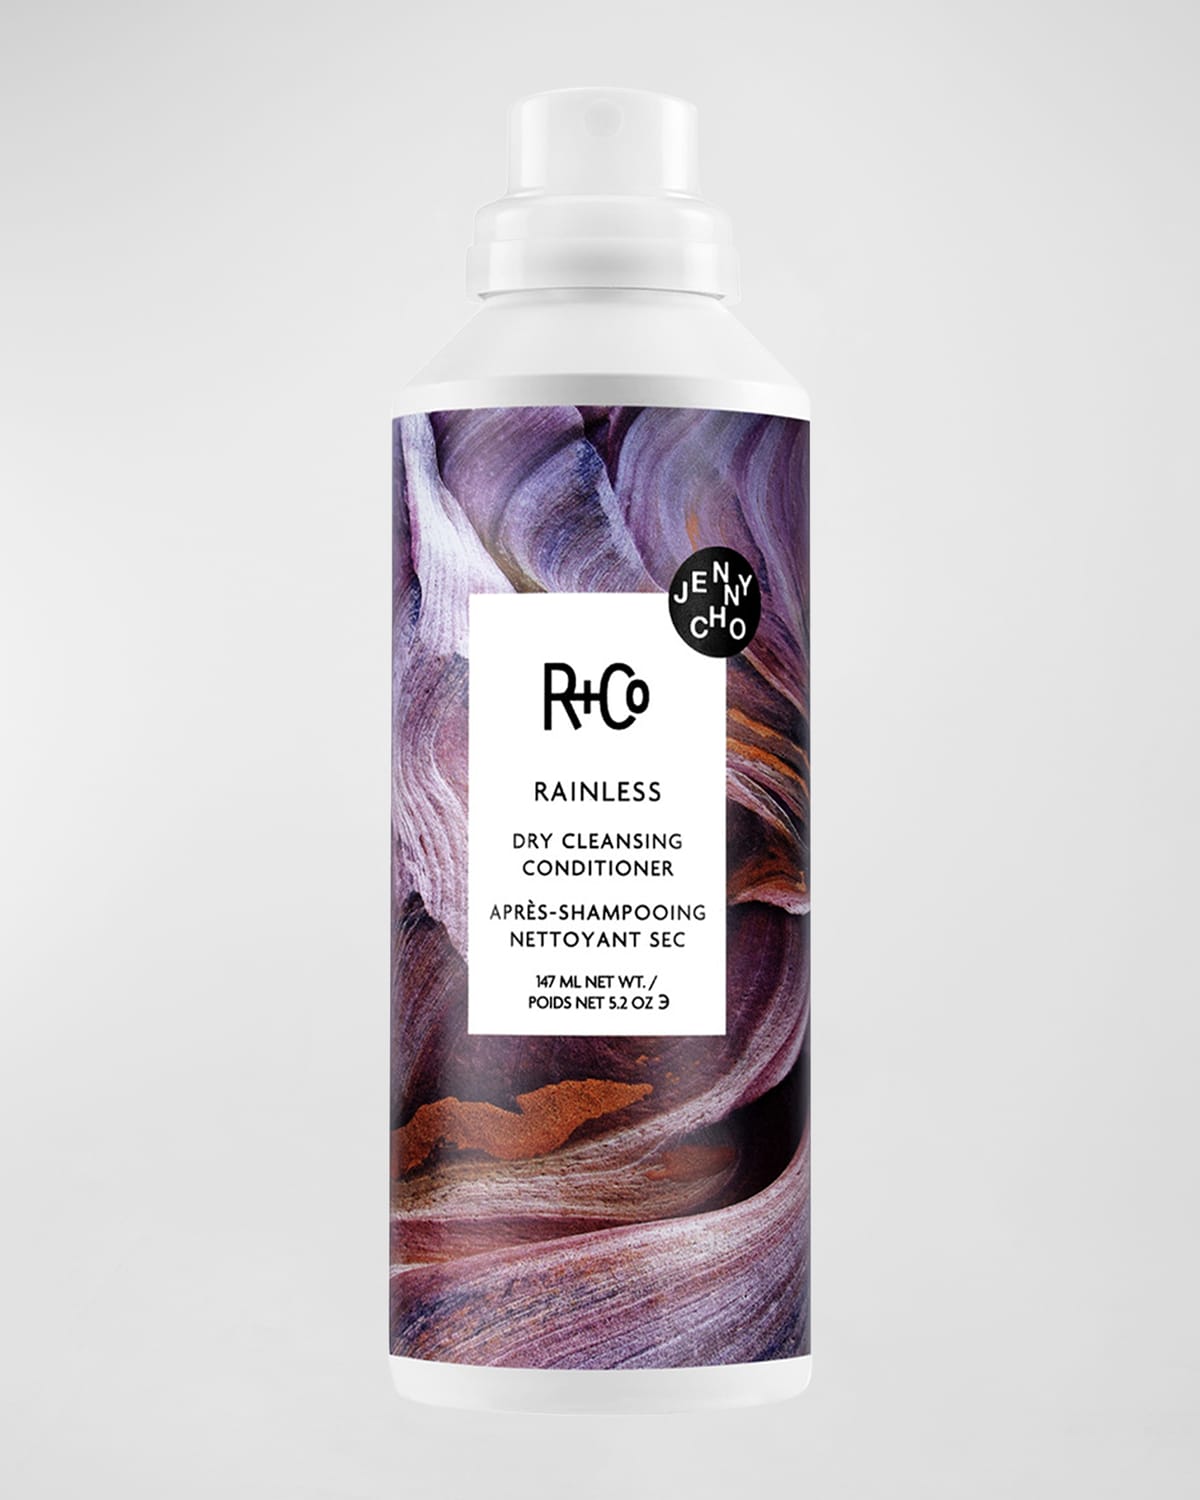 5.2 oz. Rainless Dry Cleansing Conditioner